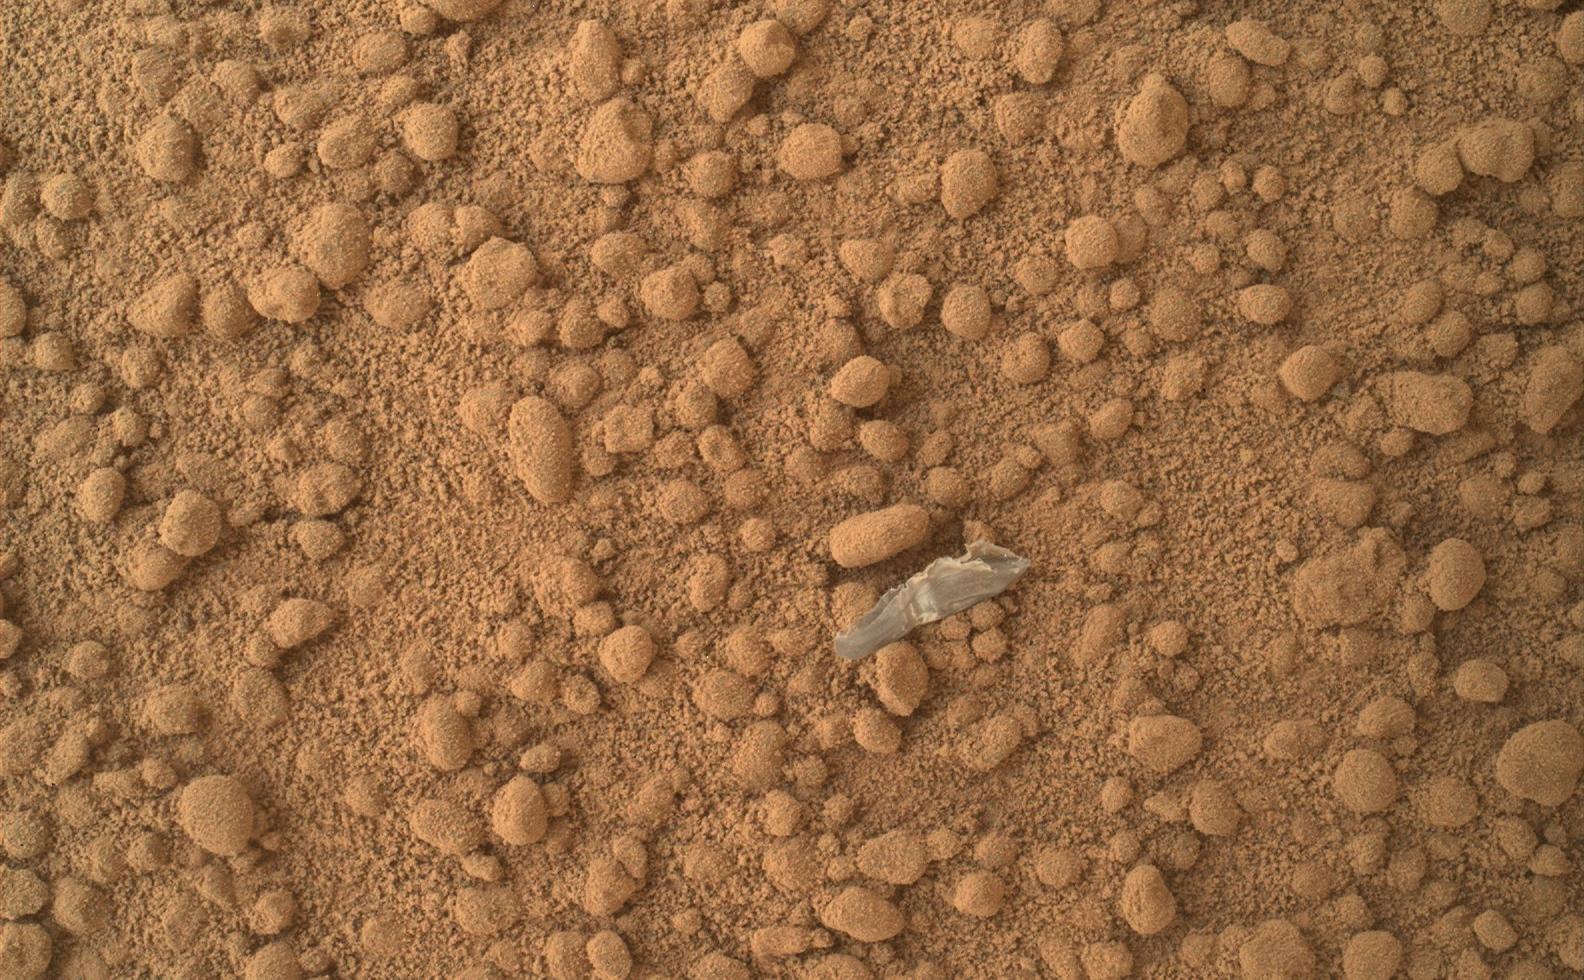 This image from the Mars Hand Lens Imager (MAHLI) camera on NASA's Mars rover Curiosity shows a small bright object on the ground beside the rover at the "Rocknest" site.